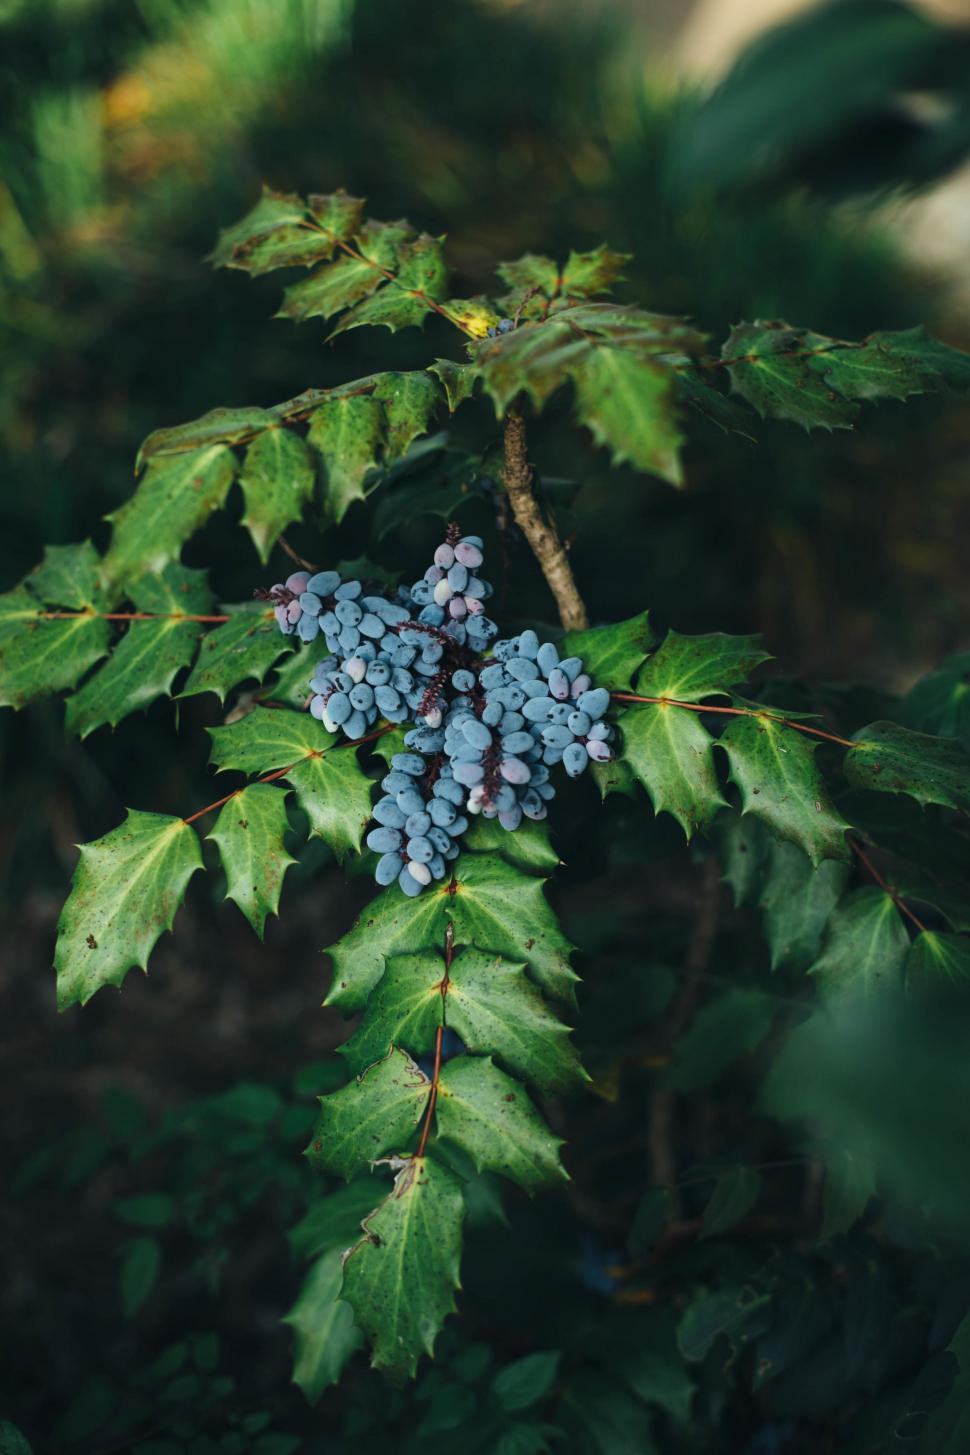 Free Image of Close Up of Berries on a Tree 